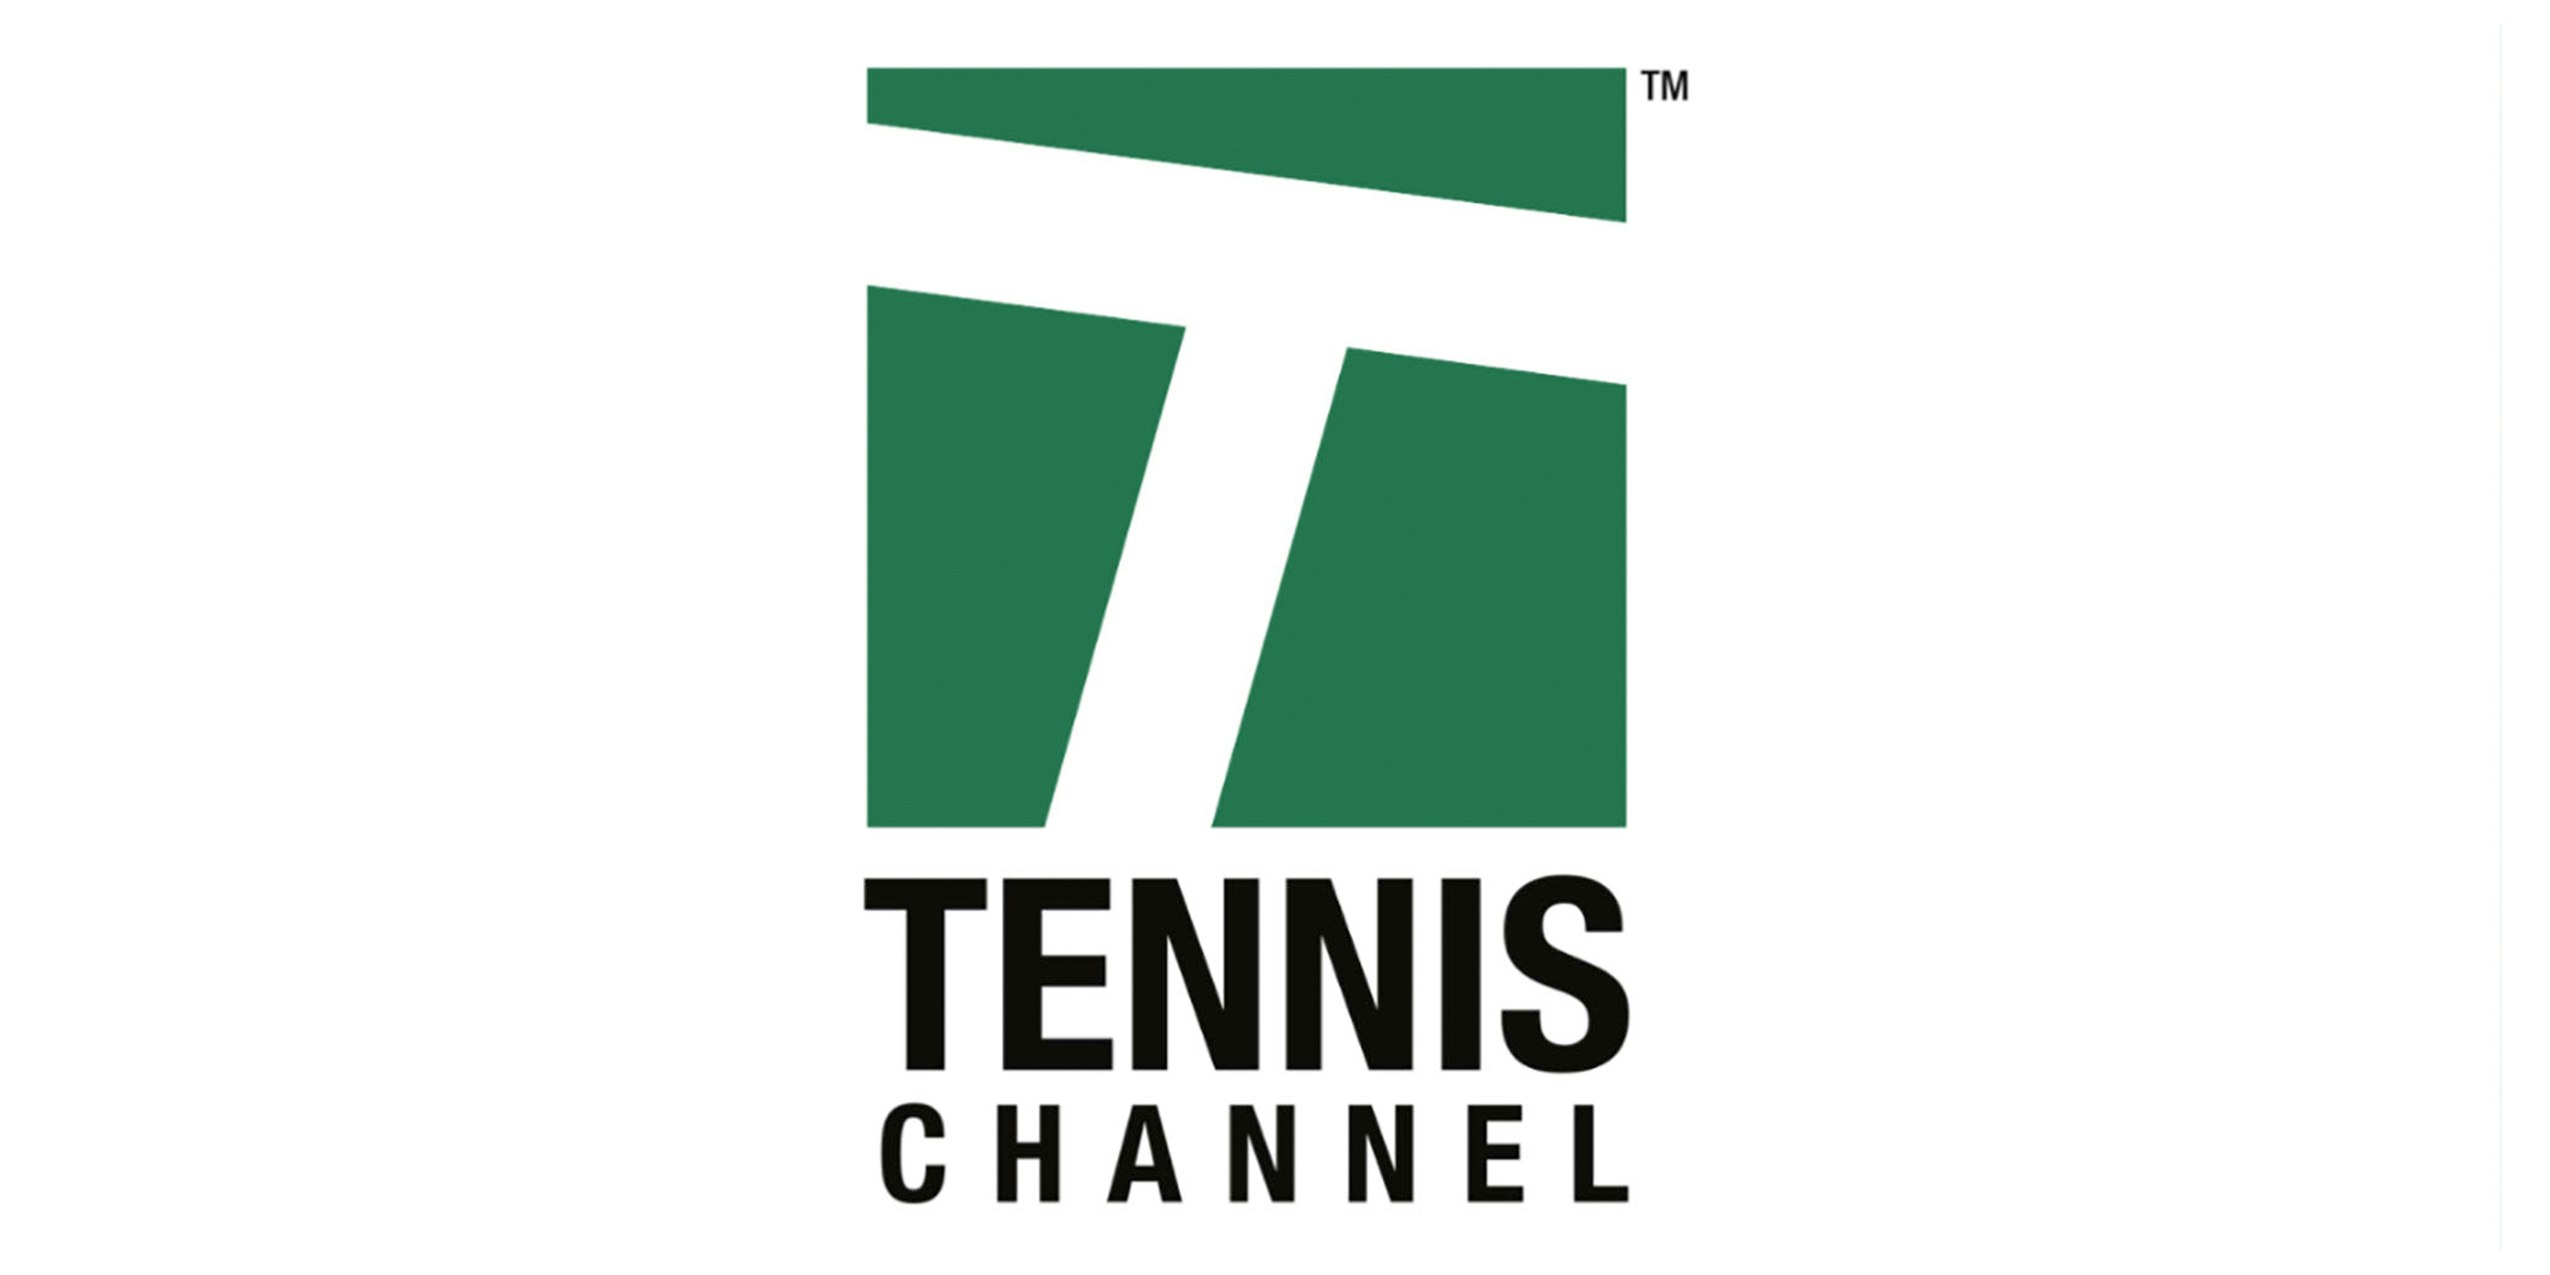 Stream Tennis Channel Live Get Tennis Live Streams and More